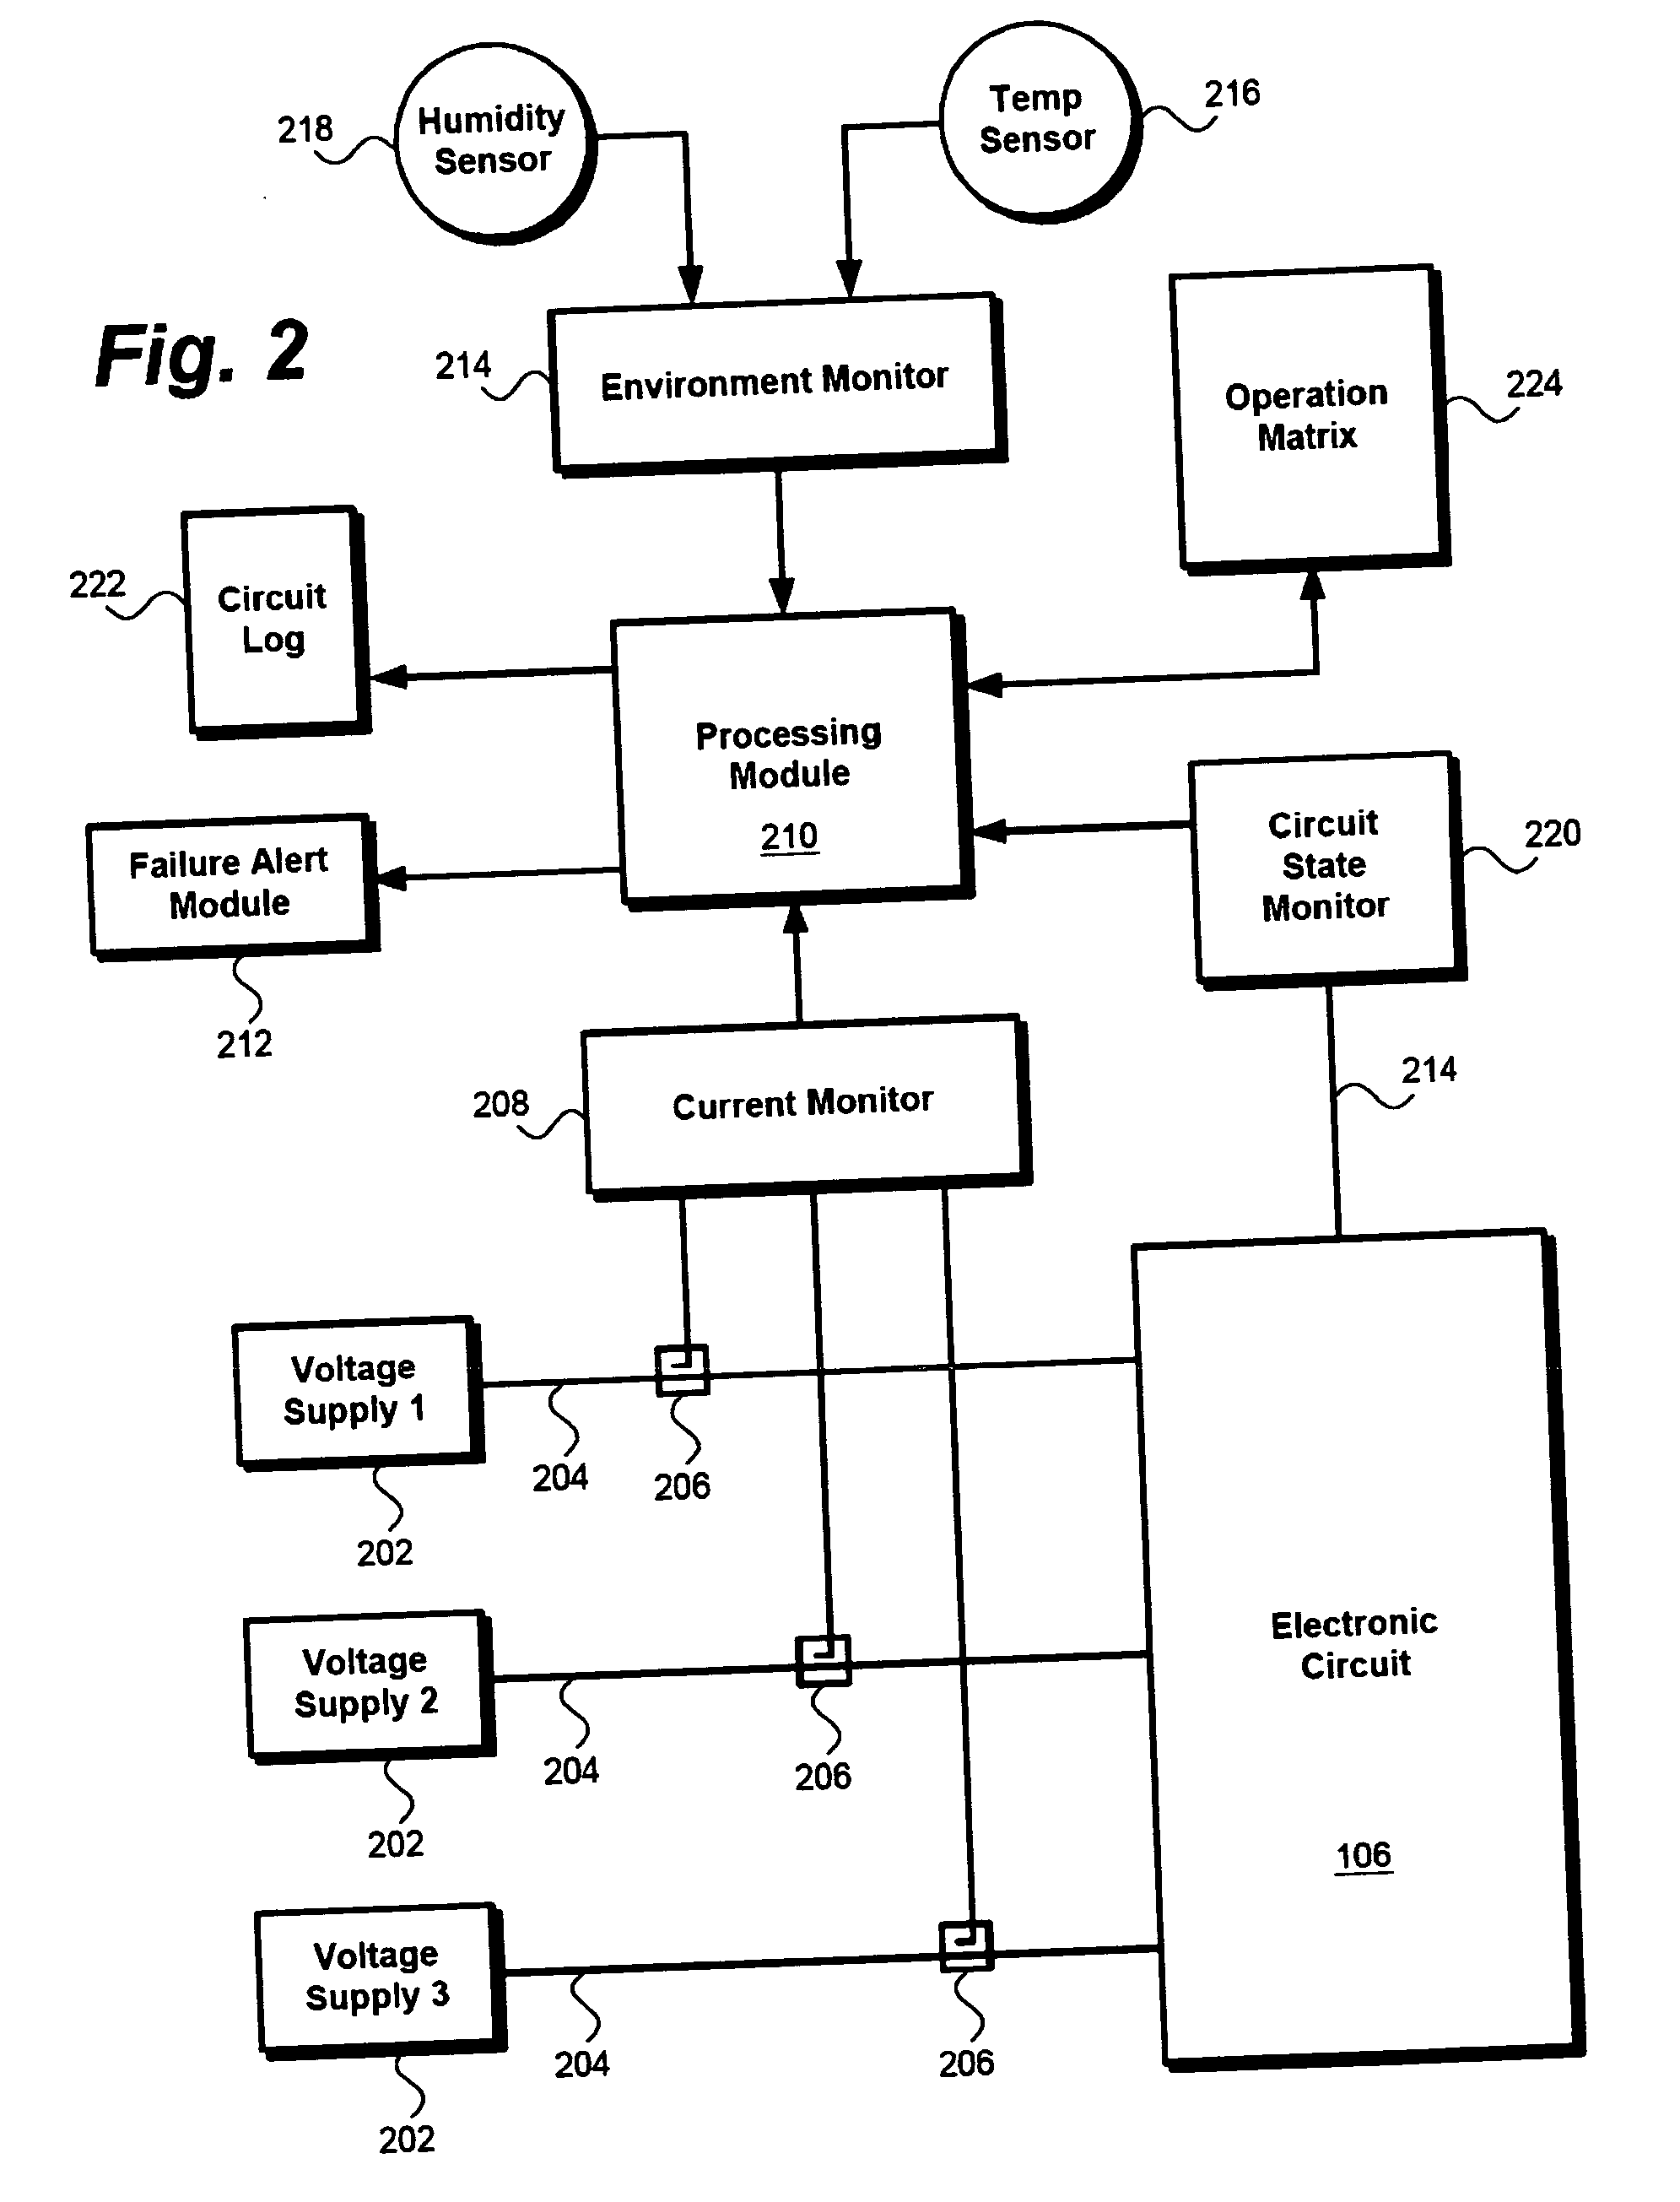 Predictive failure analysis and failure isolation using current sensing